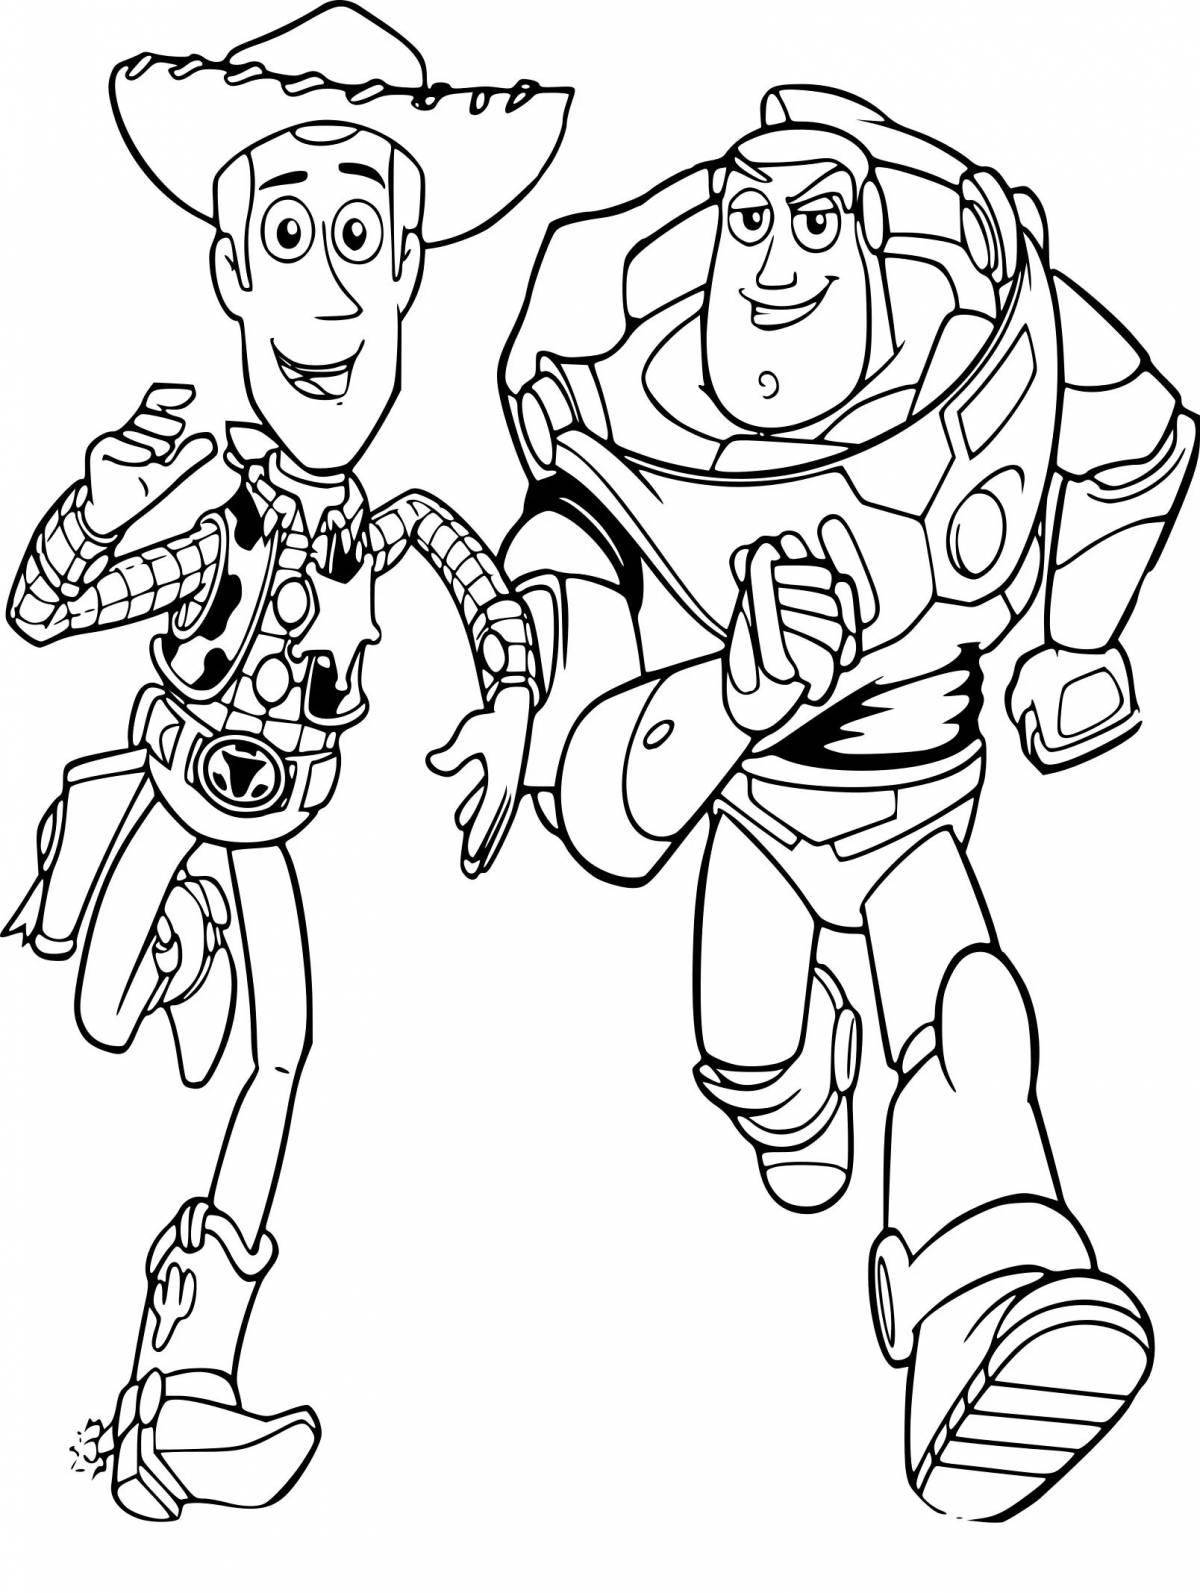 Exciting buzz coloring pages